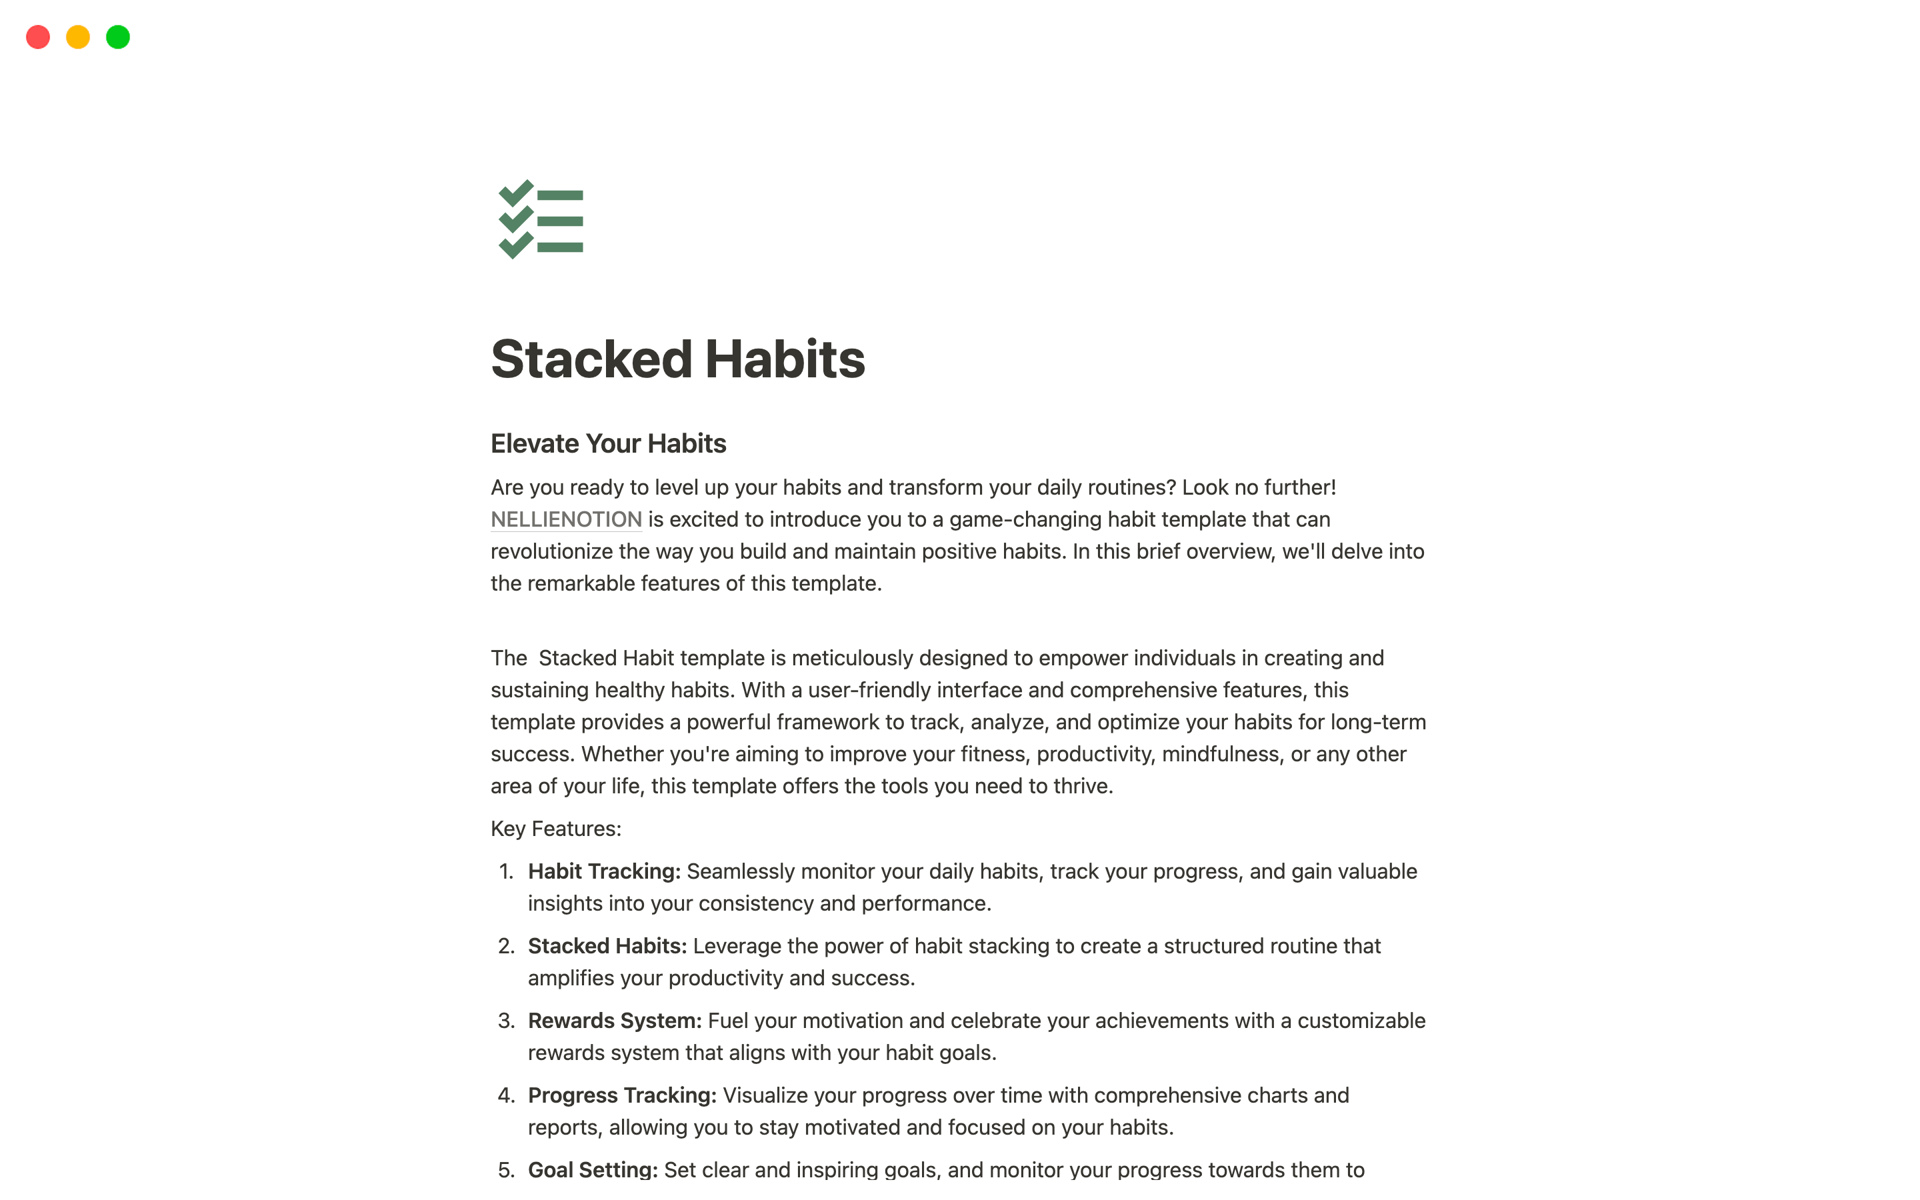 The Stacked Habits Template is a comprehensive and customizable productivity tool that helps you seamlessly integrate positive habits, track your progress, and achieve remarkable results.